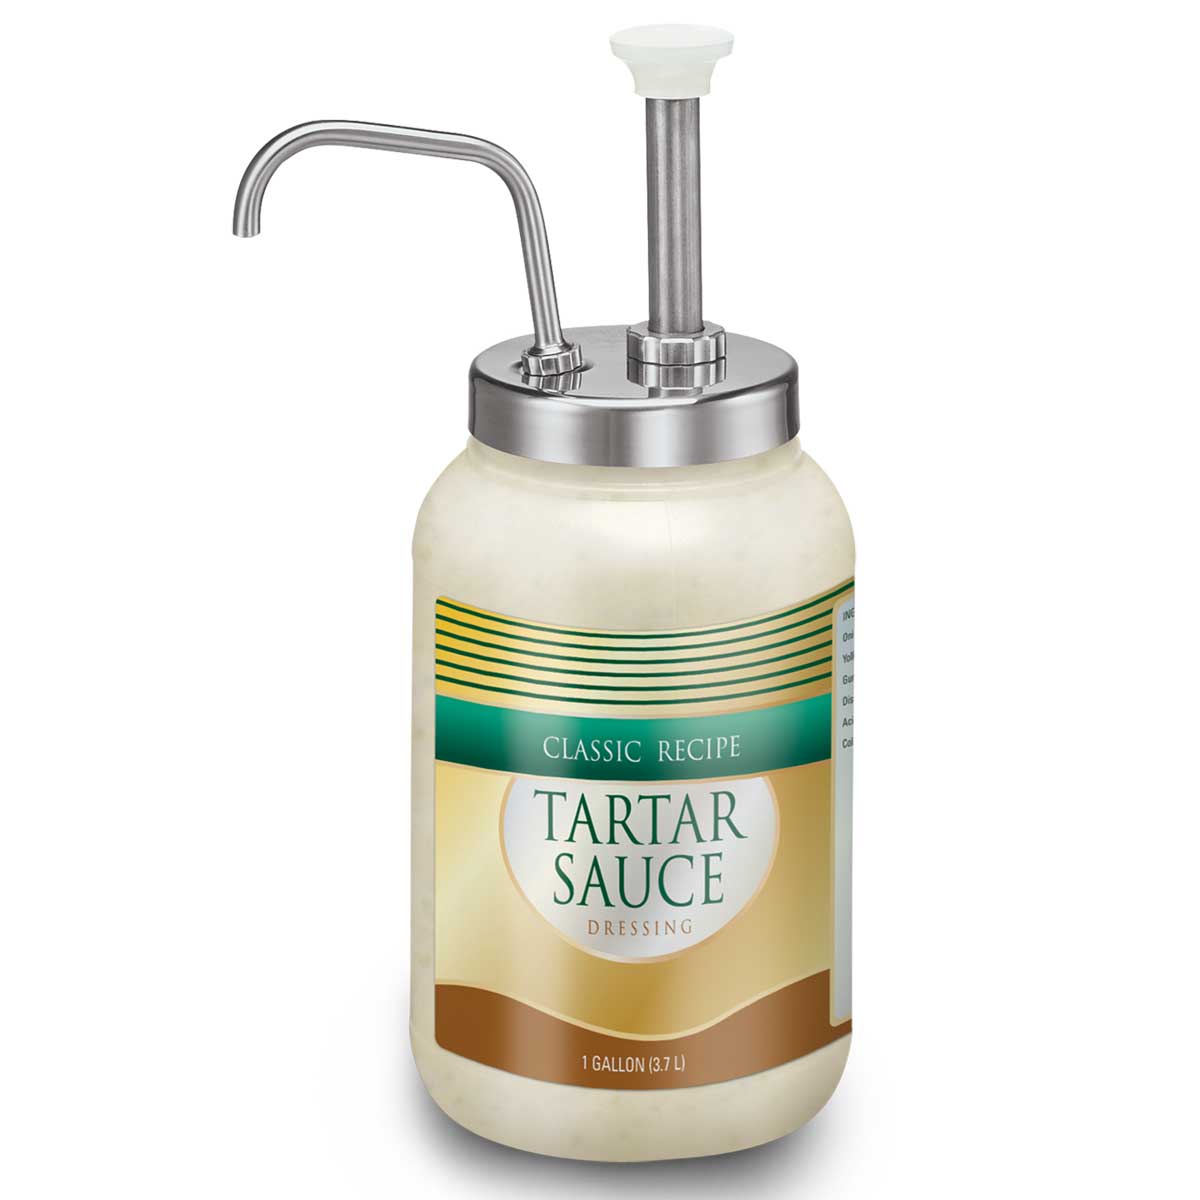 Stainless Steel Condiment Pumps for Wide-Mouth Gallon Jars - Server